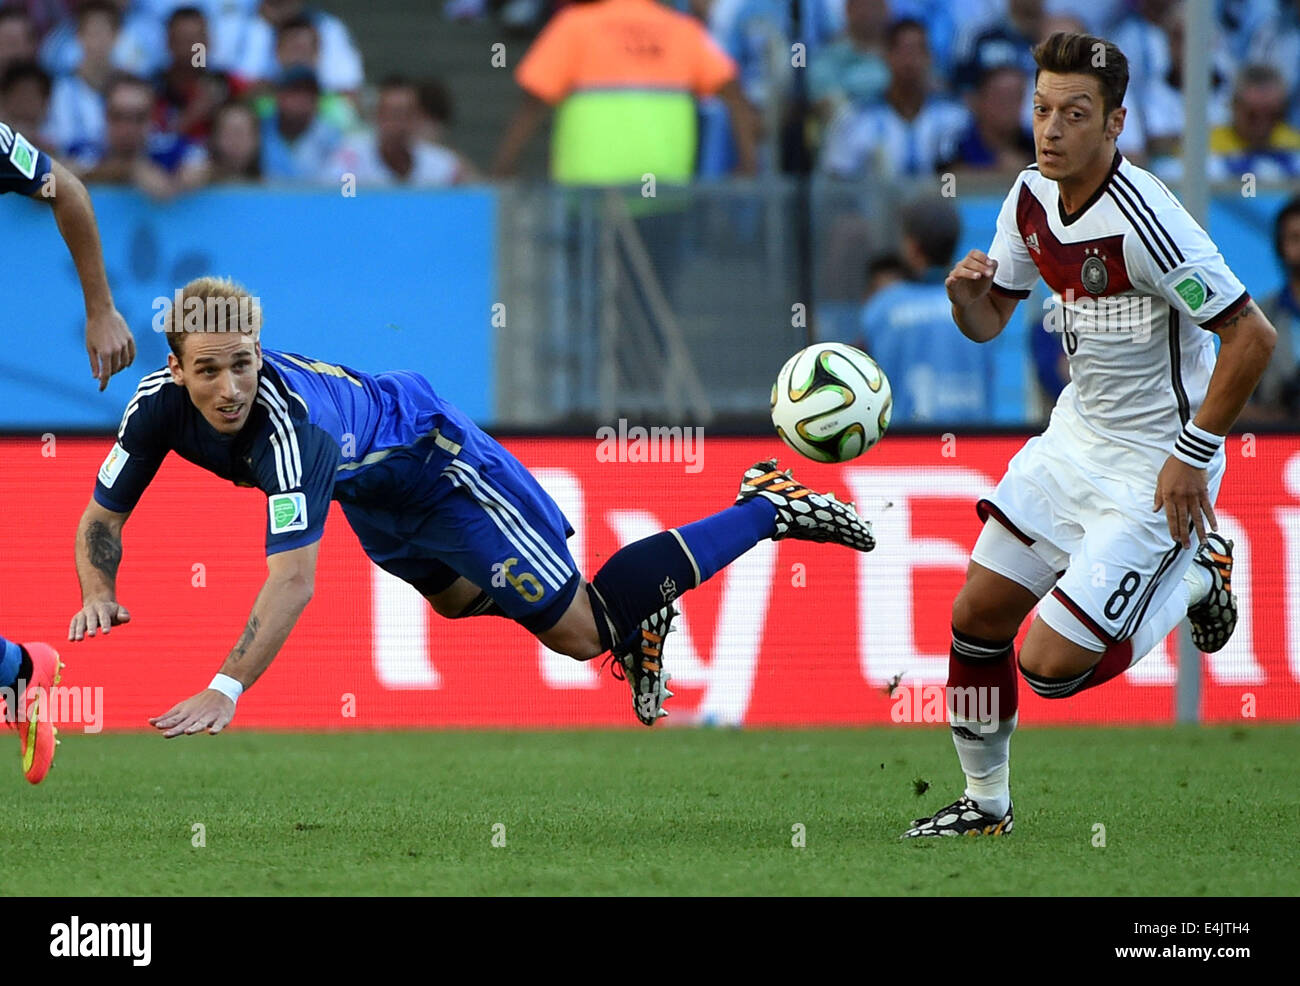 Rio De Janeiro, Brazil. 13th July, 2014. Argentina's Lucas Biglia (L) vies with Germany's Mesut Ozil during the final match between Germany and Argentina of 2014 FIFA World Cup at the Estadio do Maracana Stadium in Rio de Janeiro, Brazil, on July 13, 2014. Credit:  Liu Dawei/Xinhua/Alamy Live News Stock Photo